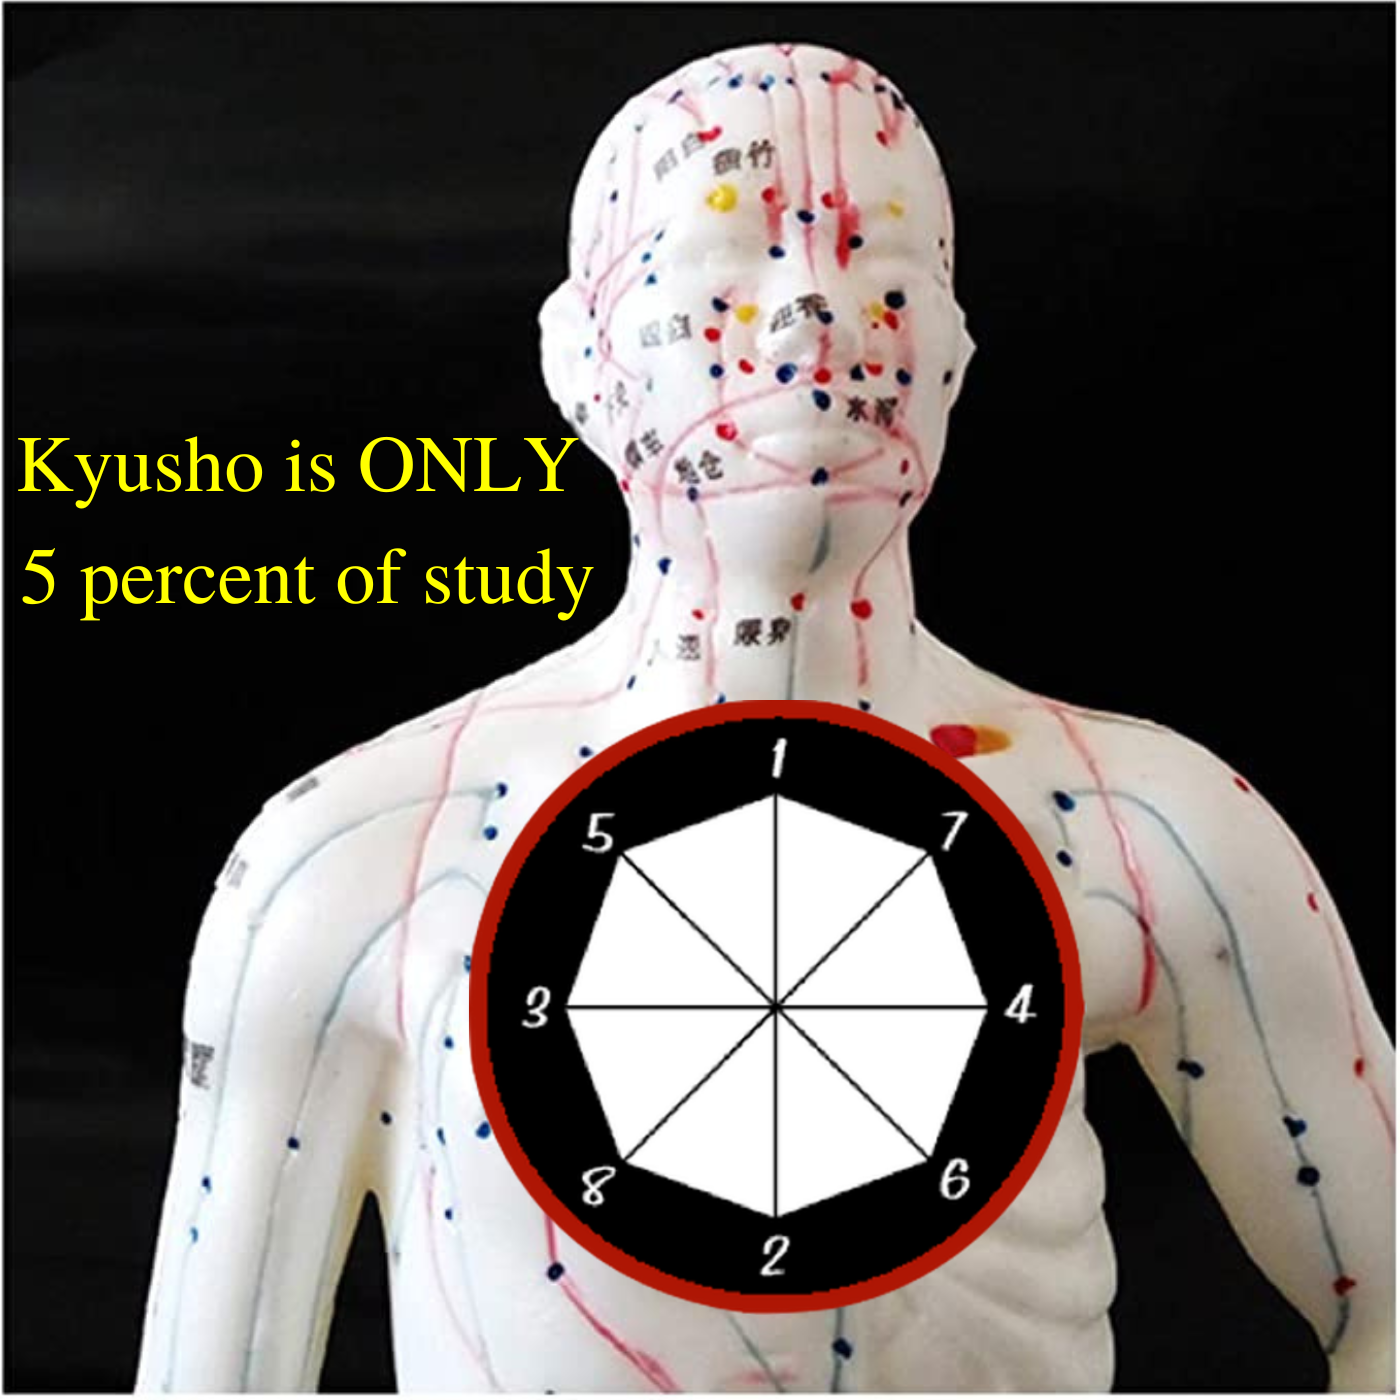 Kyusho is ONLY 5 percent of study